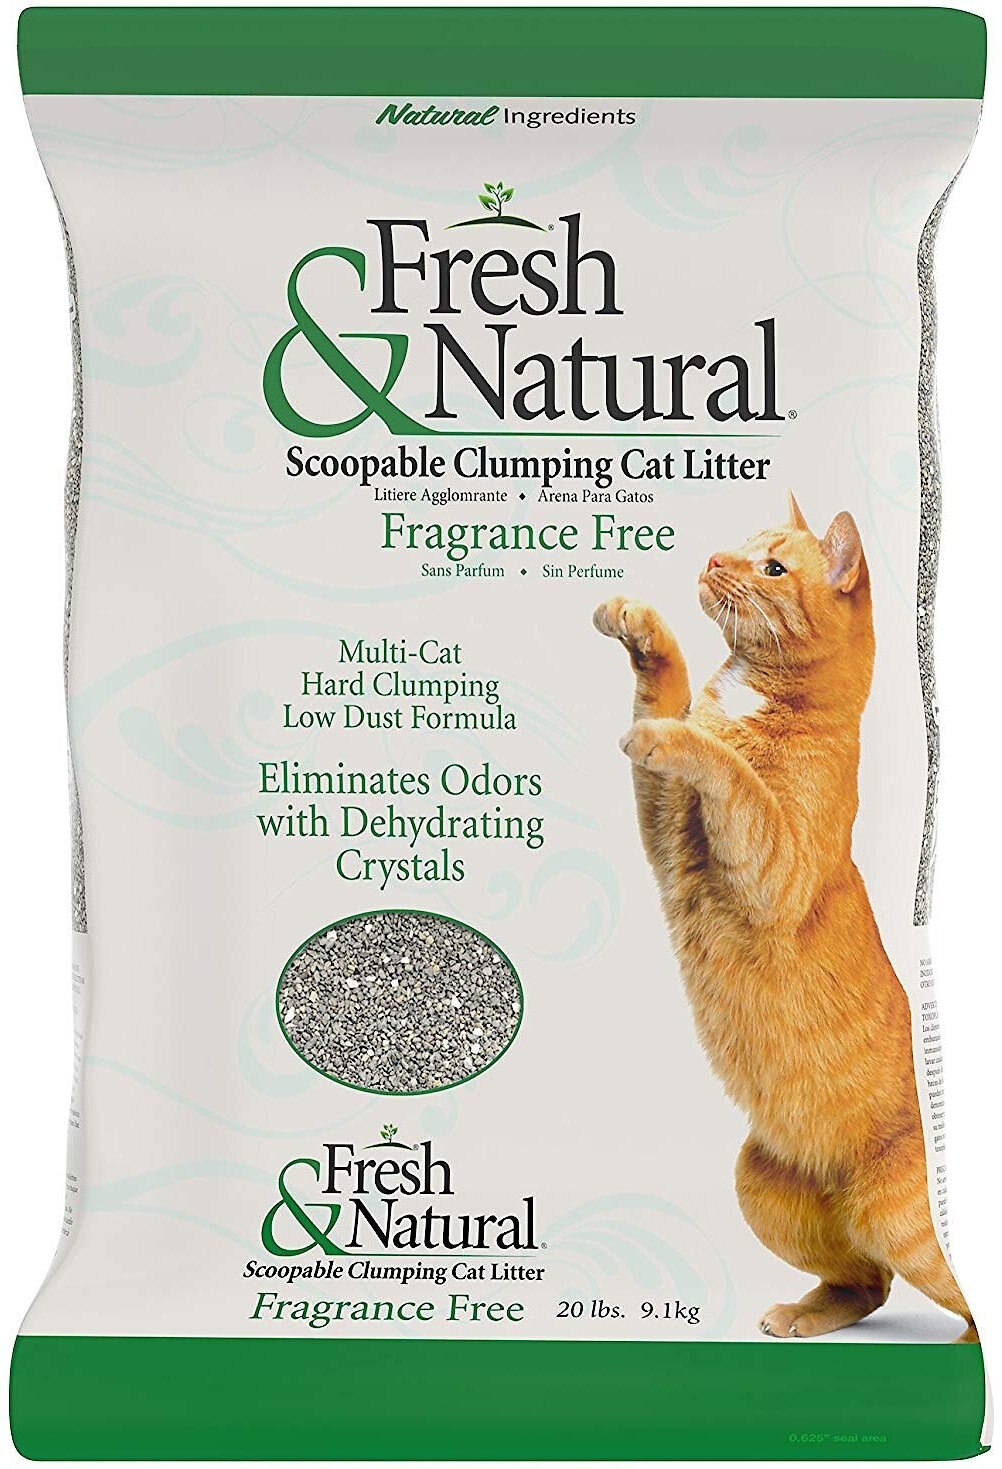 FRESH & NATURAL Unscented Clumping Clay Cat Litter, 20lb box